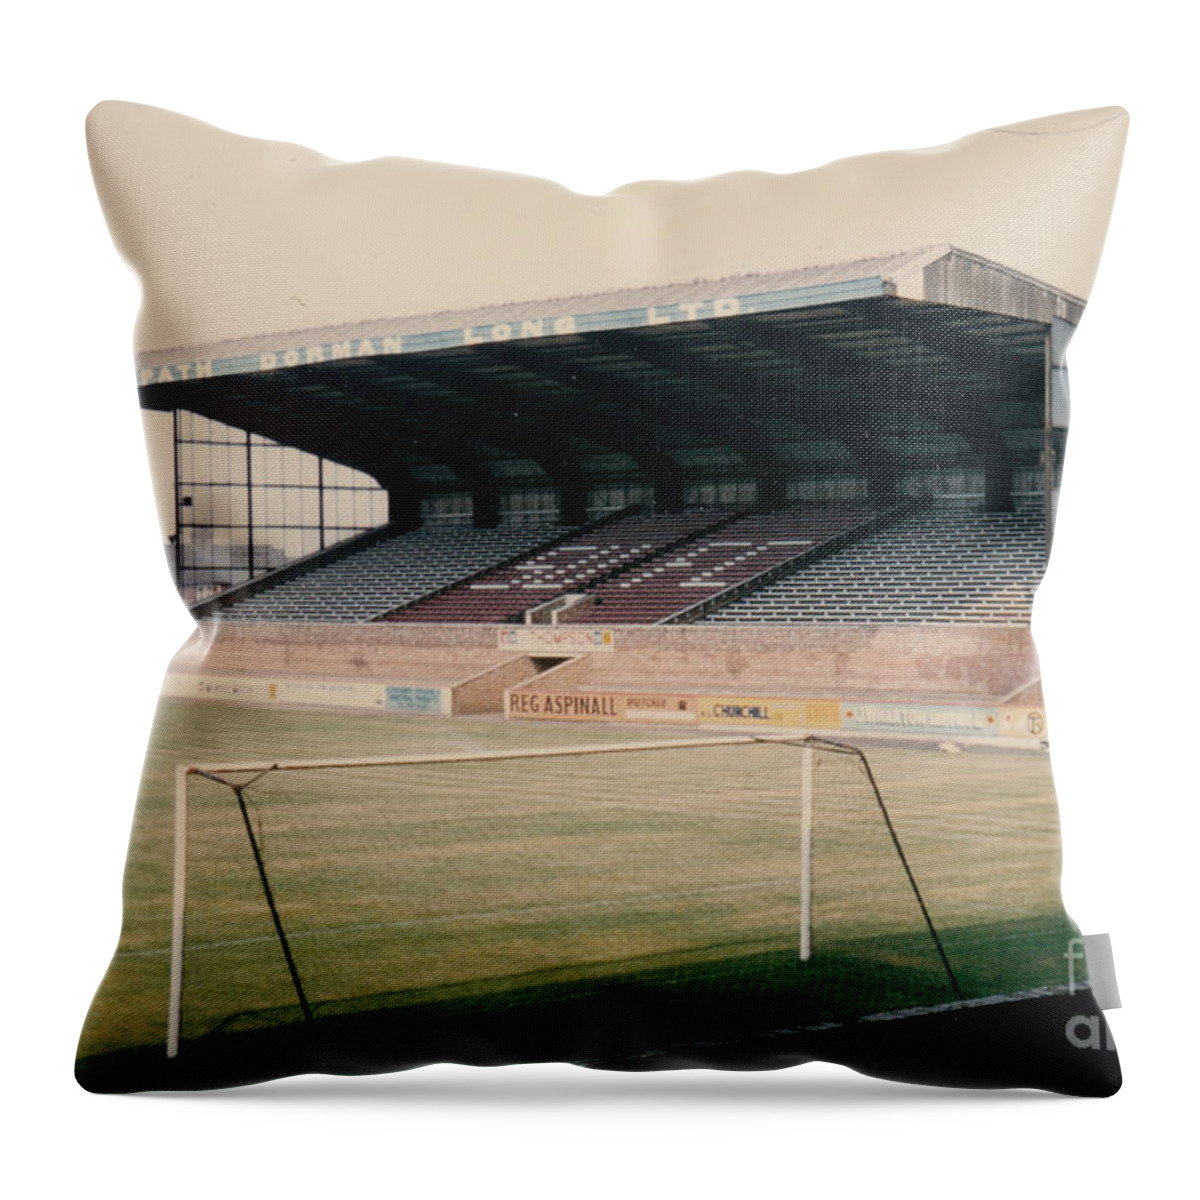  Throw Pillow featuring the photograph Scunthorpe United - Old Showground - East Stand 2 - 1970s by Legendary Football Grounds